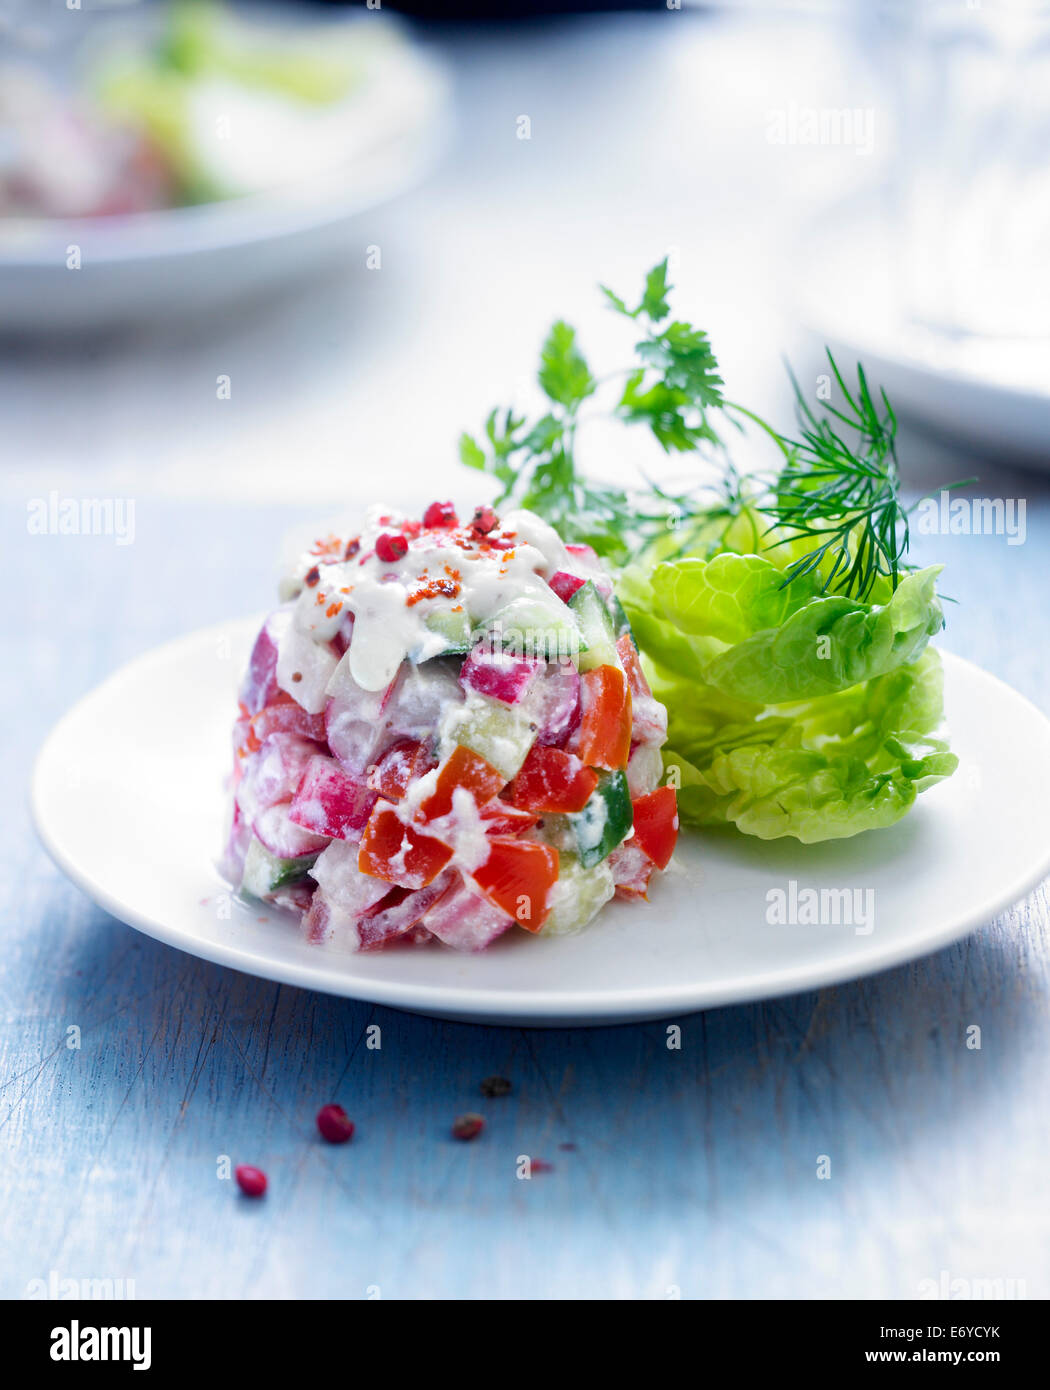 Vegetable tartare with chervil Stock Photo